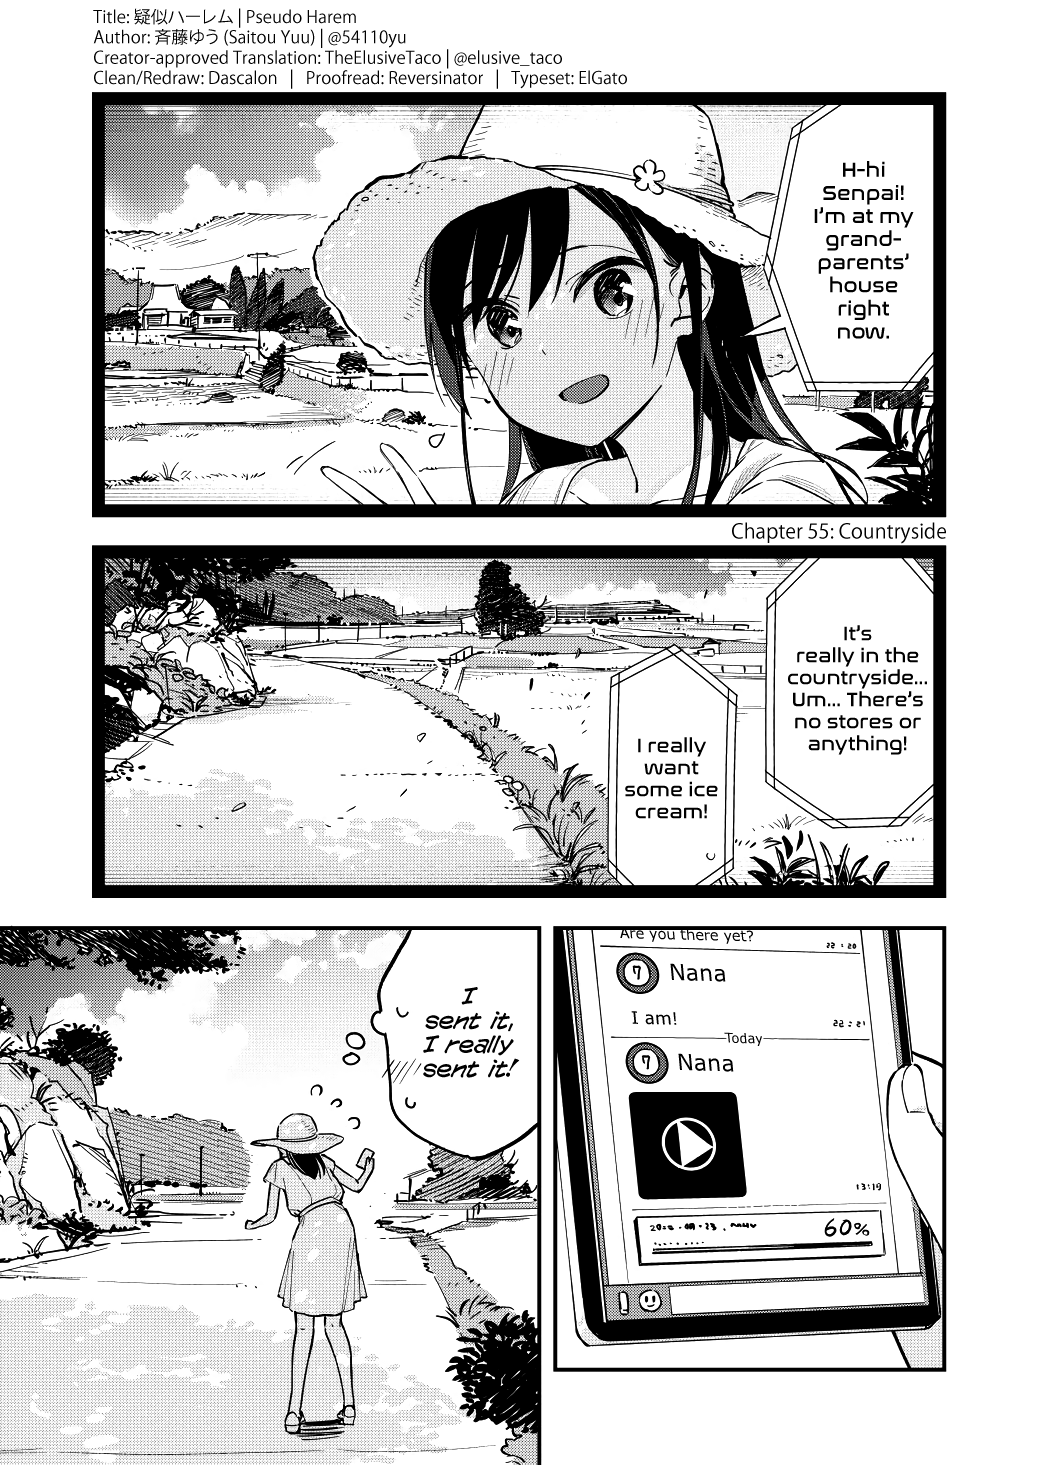 Pseudo Harem Vol.3 Chapter 55: Countryside - Picture 1